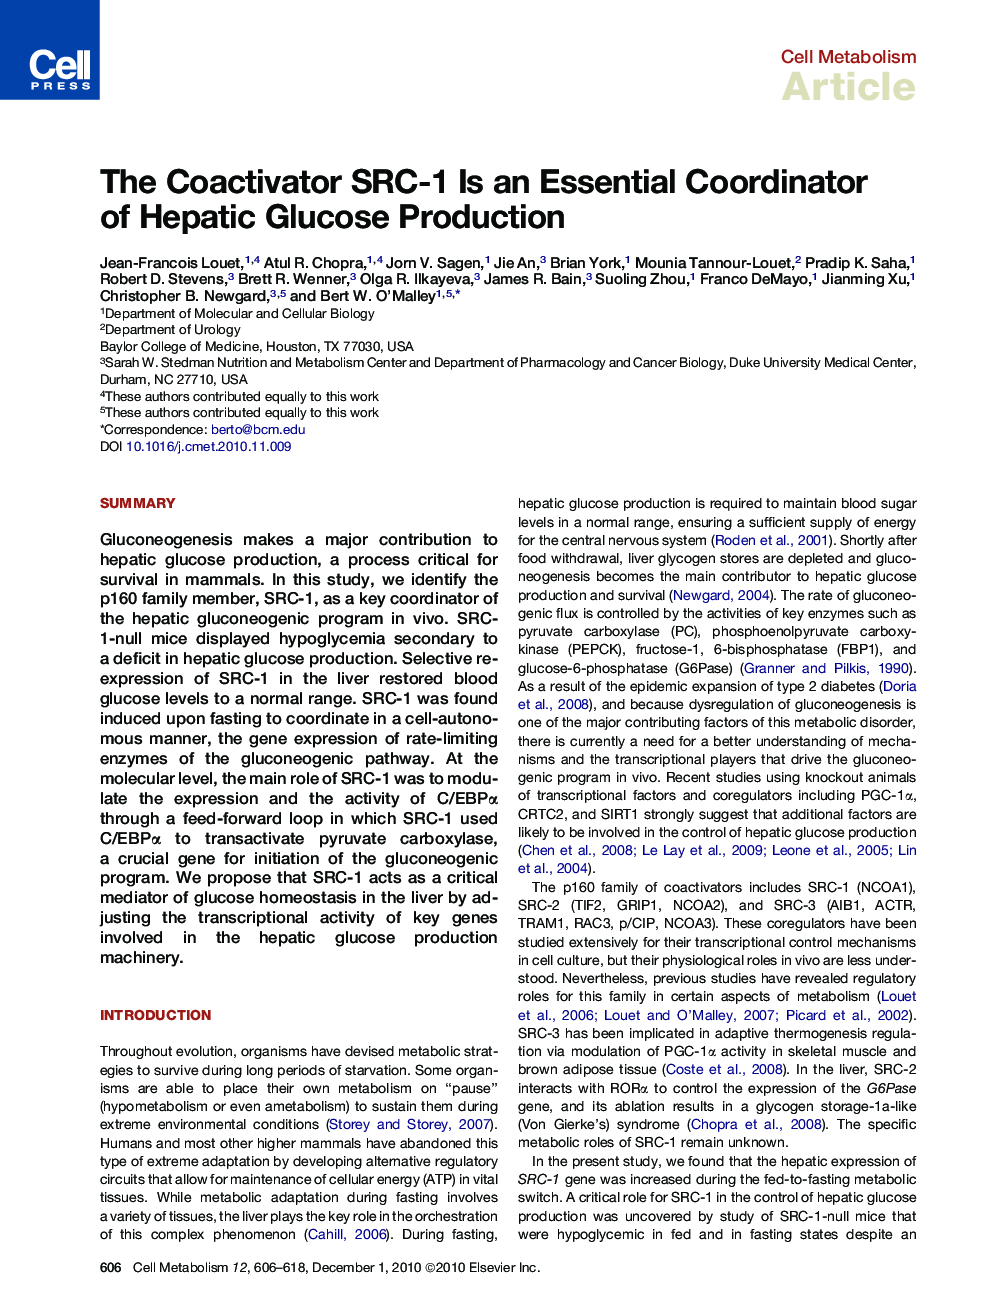 The Coactivator SRC-1 Is an Essential Coordinator of Hepatic Glucose Production